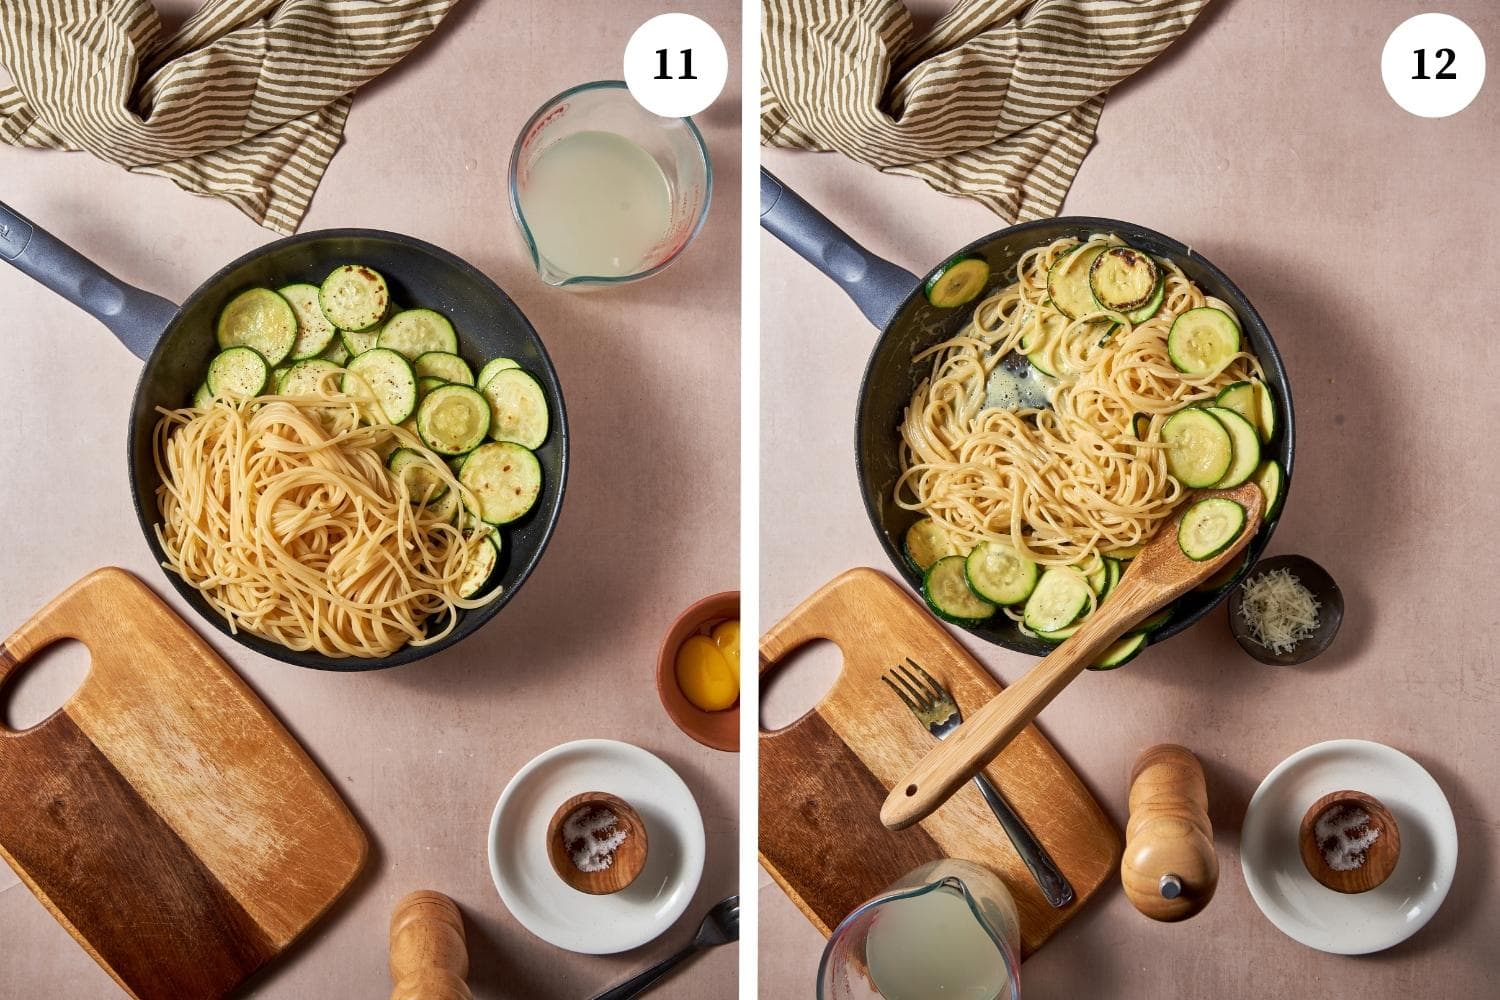 Vegetarian carbonara procedure: the noodles are added to the pan with cooked zucchini. Then, 2 to 3 tablespoons of the pasta cooking water are added and the ingredients together are sauted.